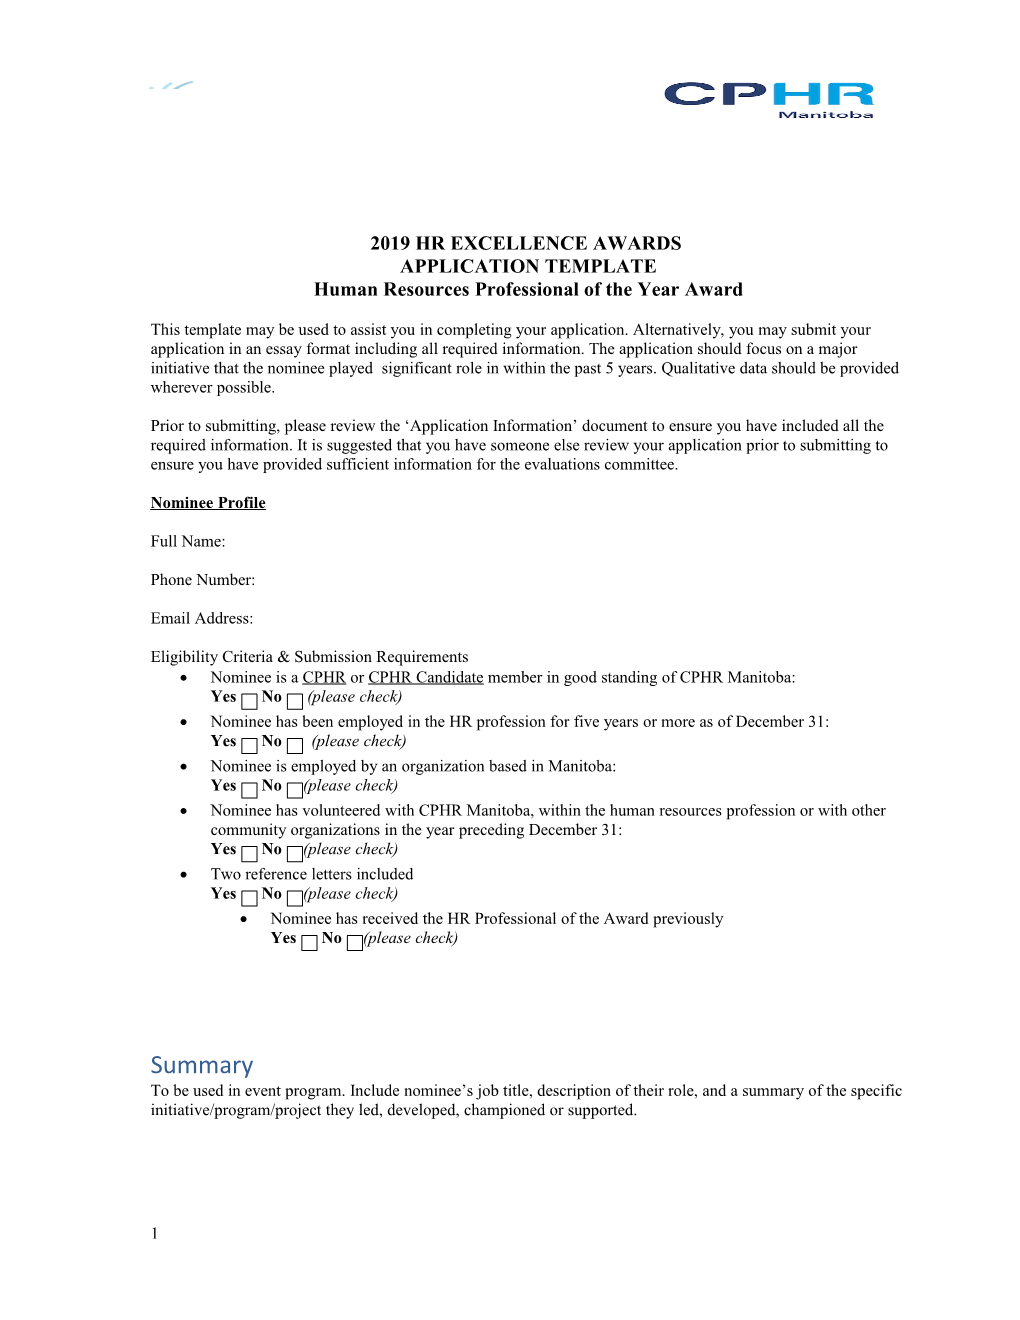 2019HR EXCELLENCE AWARDS APPLICATION TEMPLATE Human Resources Professional of the Year Award